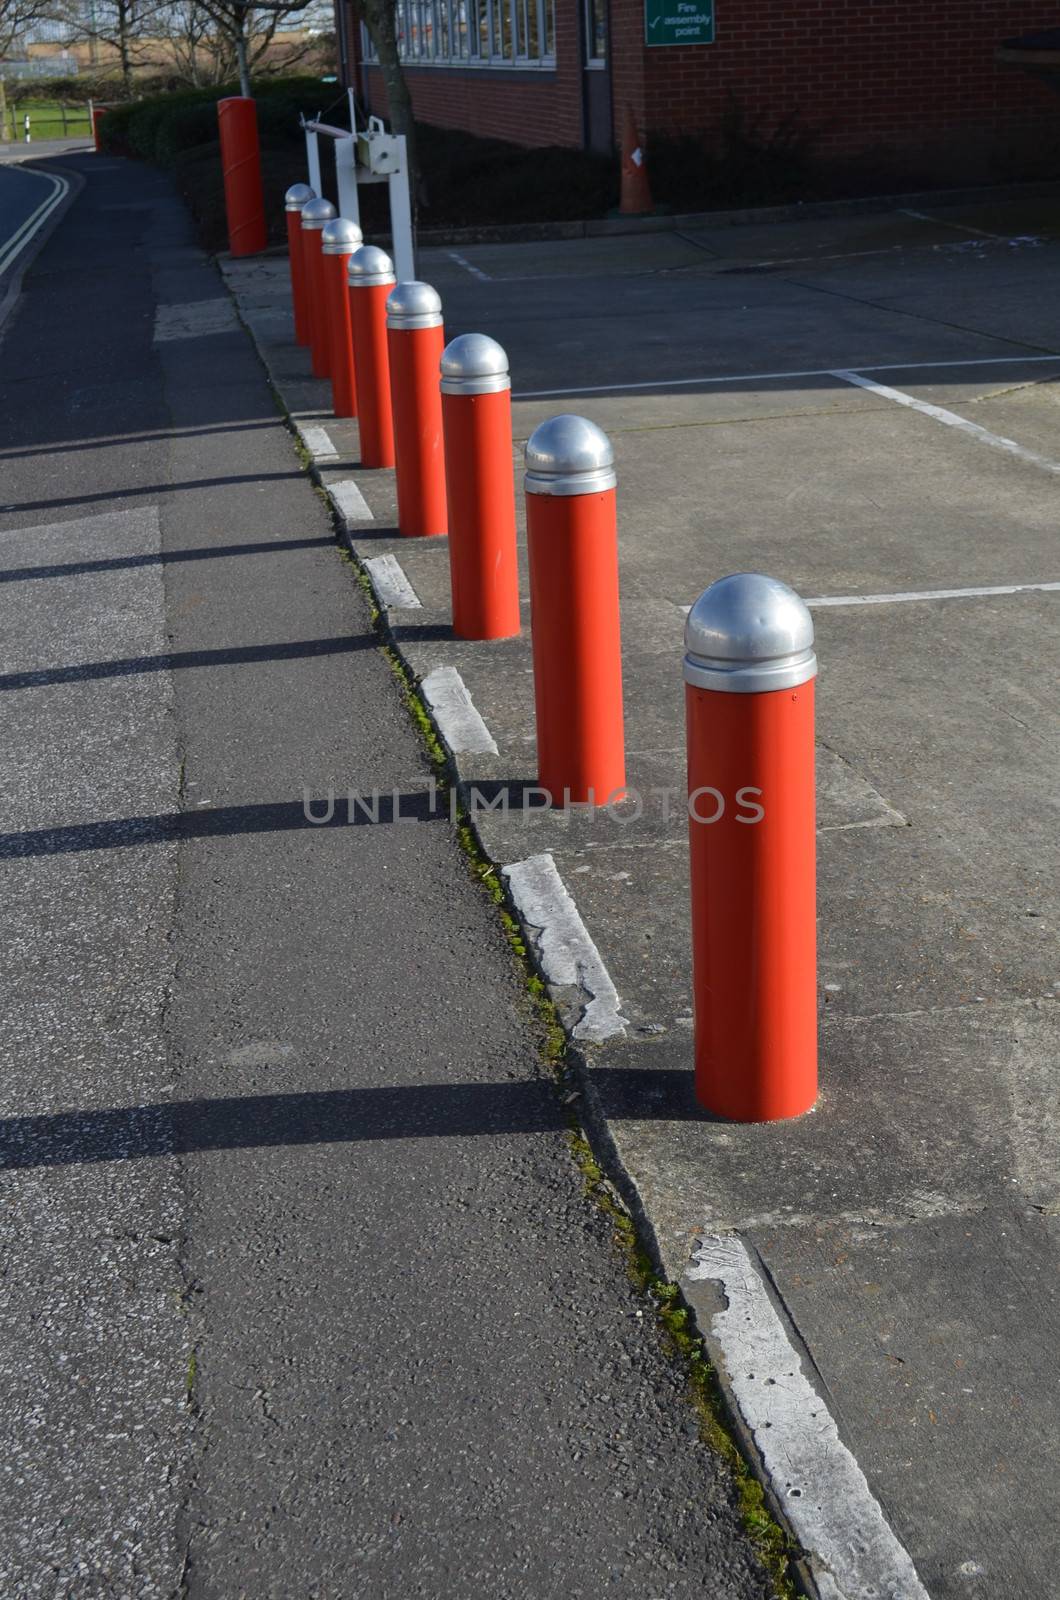 Security bollards. by bunsview